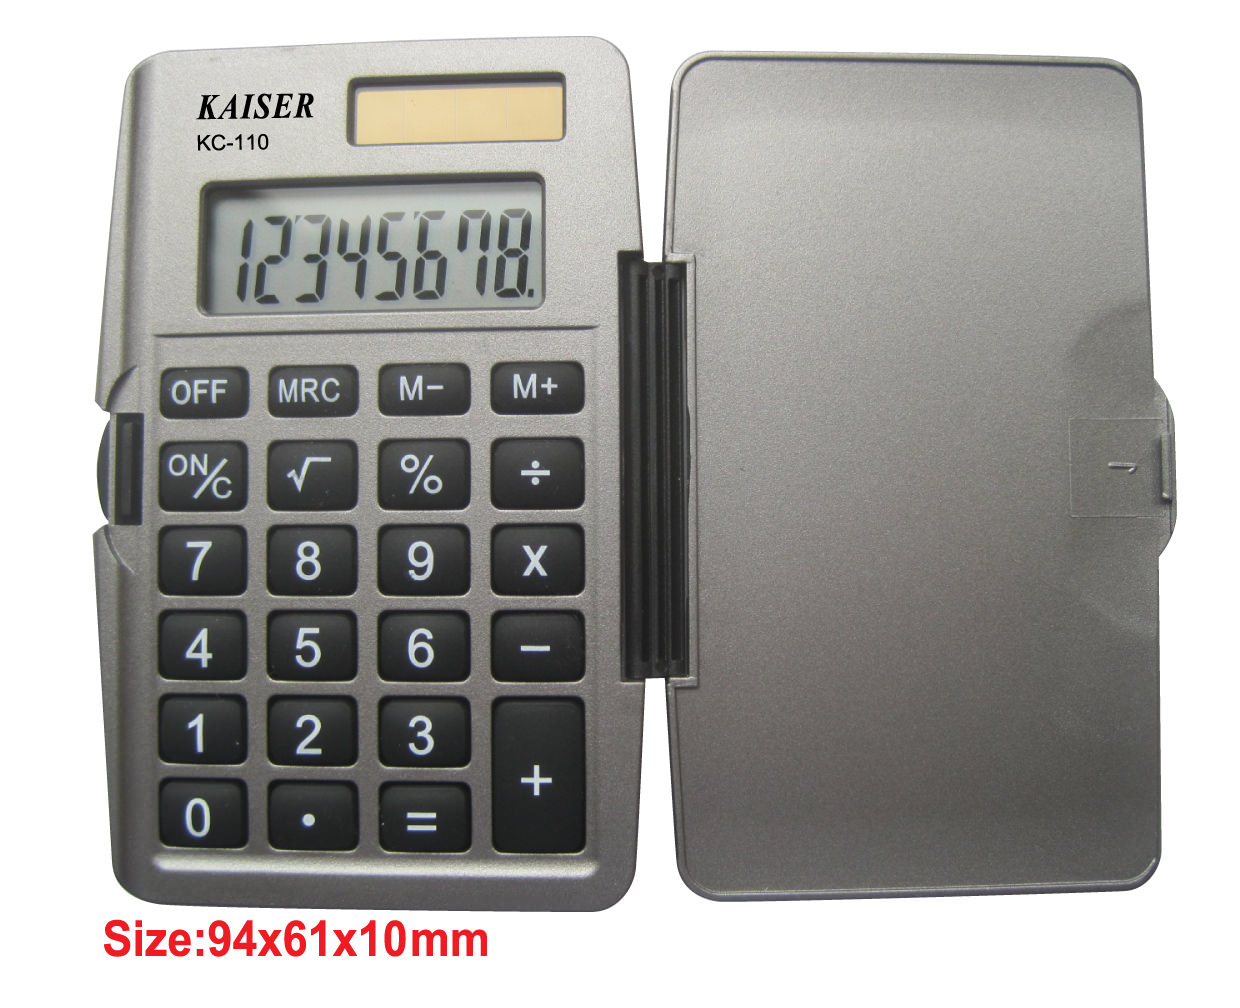 8 digit handy calculator with cover